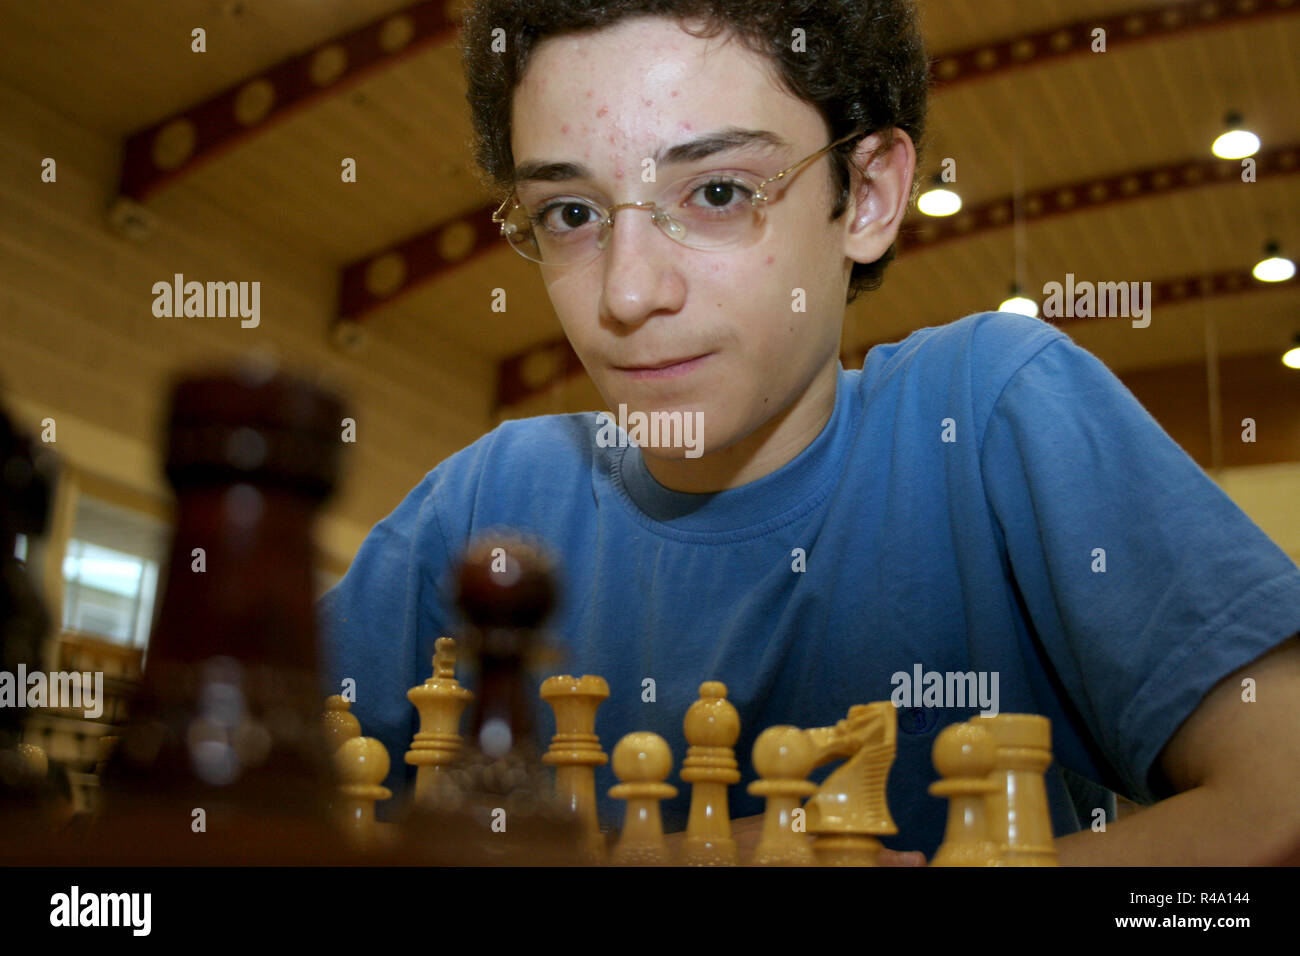 FILE PICS: Fabiano Caruana who plays in the London World Chess championships 2018. Portrait of Fabiano Caruana taken in July 13 2006, during a break at the Andorra Chess Open 2006. Born July 30 1992, in this picture he was 13 years, 11 months and 13 days old. One year later (at the age of 14 years, 11 months and 20 days), he became the youngest grandmaster in the history of both Italy and the United States. Credit: Joan Pla Vivoles/Alamy Live News Stock Photo